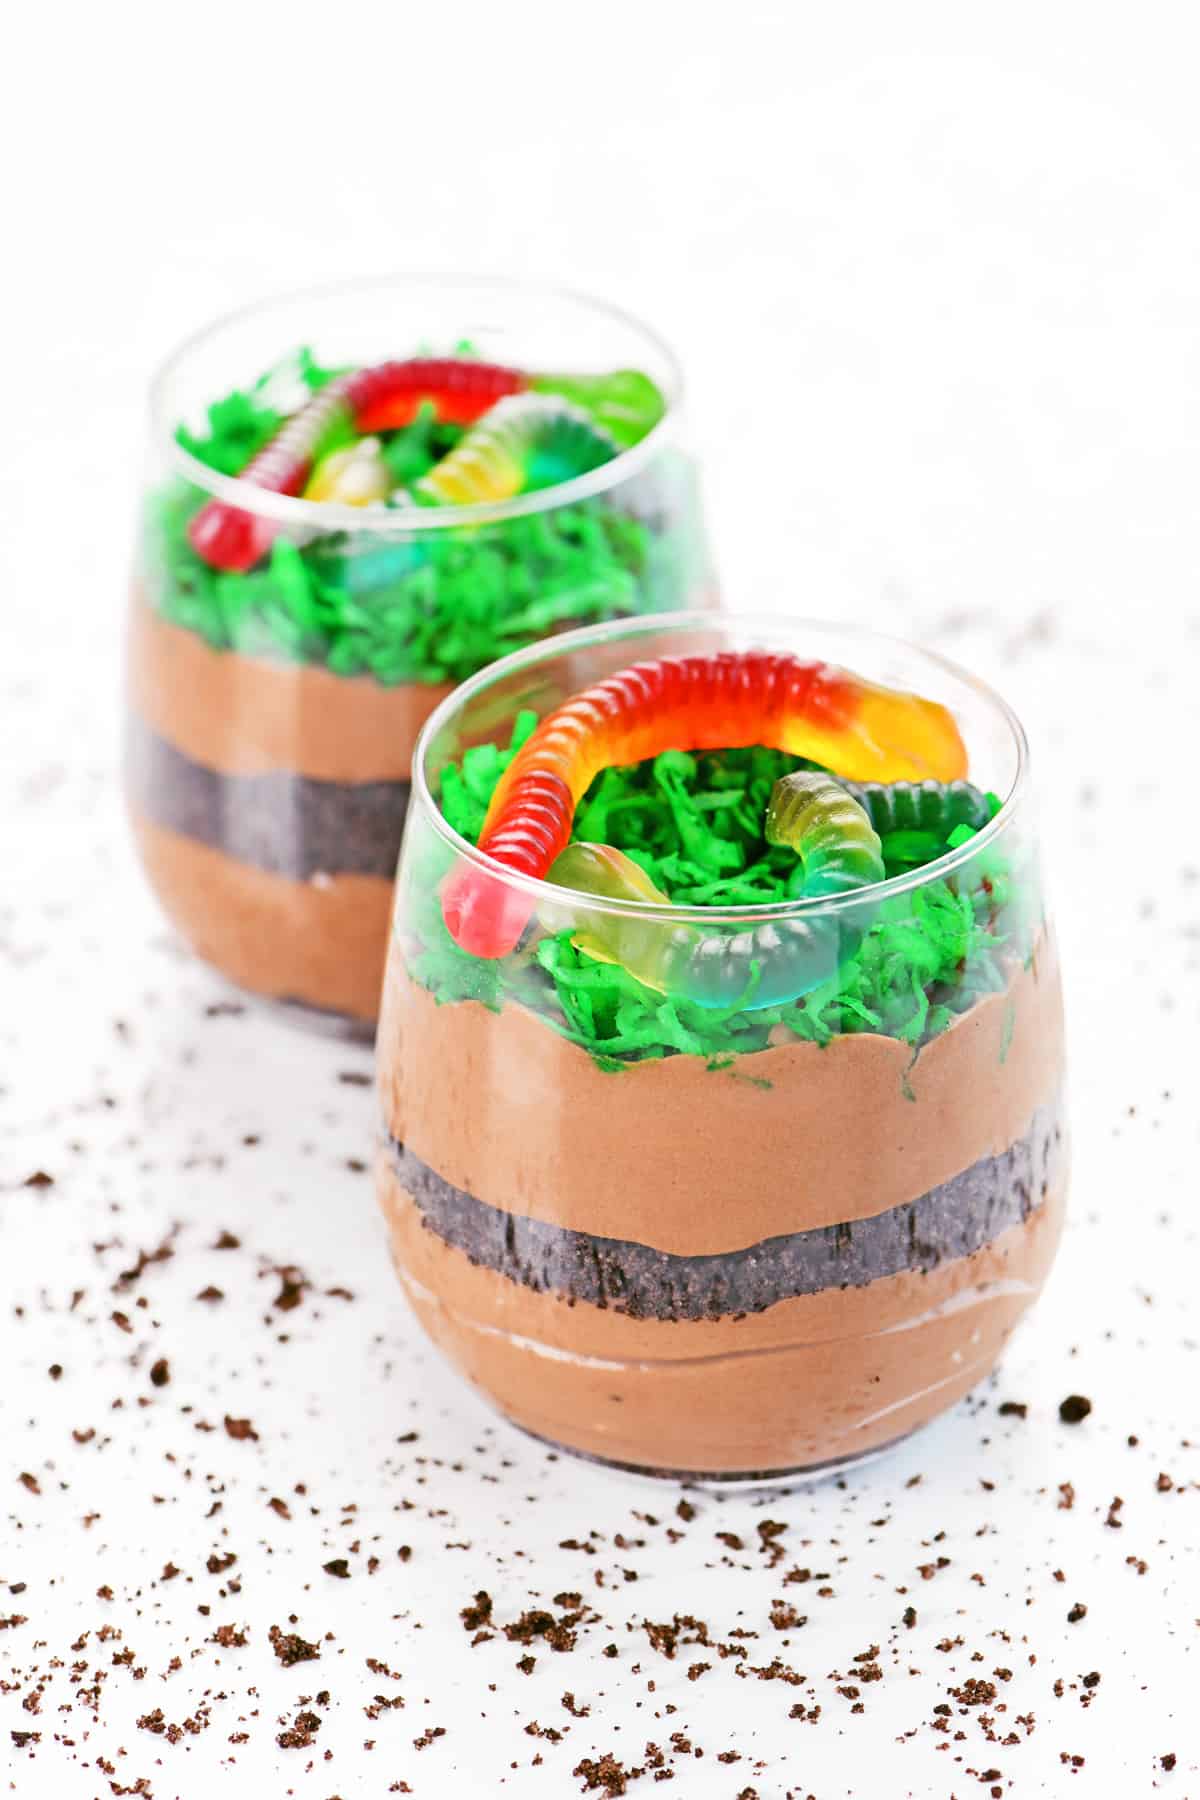 Dirt cake cups with crushed Oreos and chocolate pudding topped with green coconut and gummy worms.